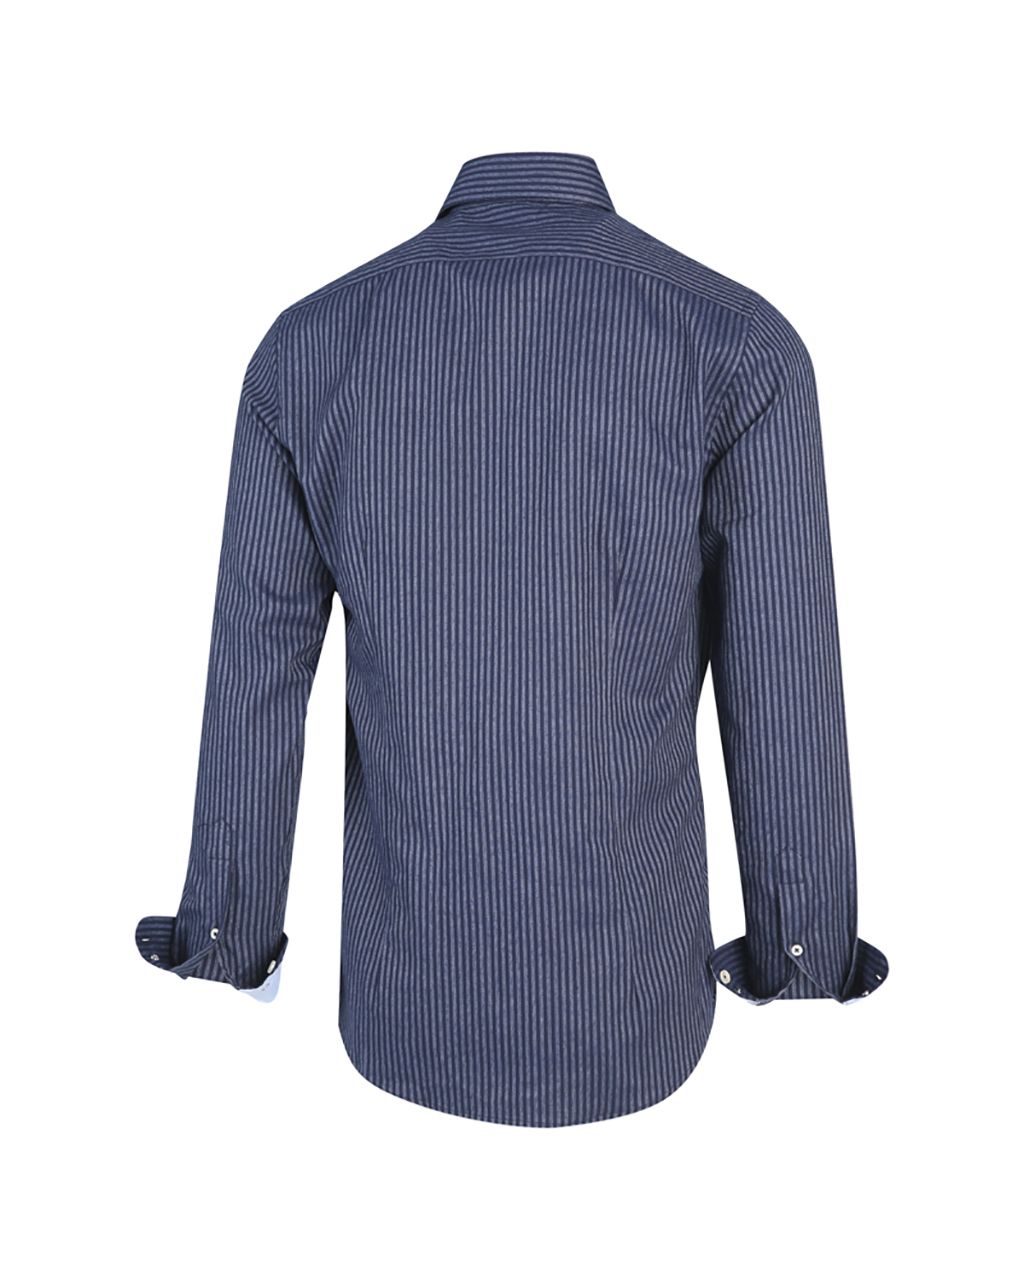 Blue Industry Casual Overhemd LM Blauw 060551-001-38